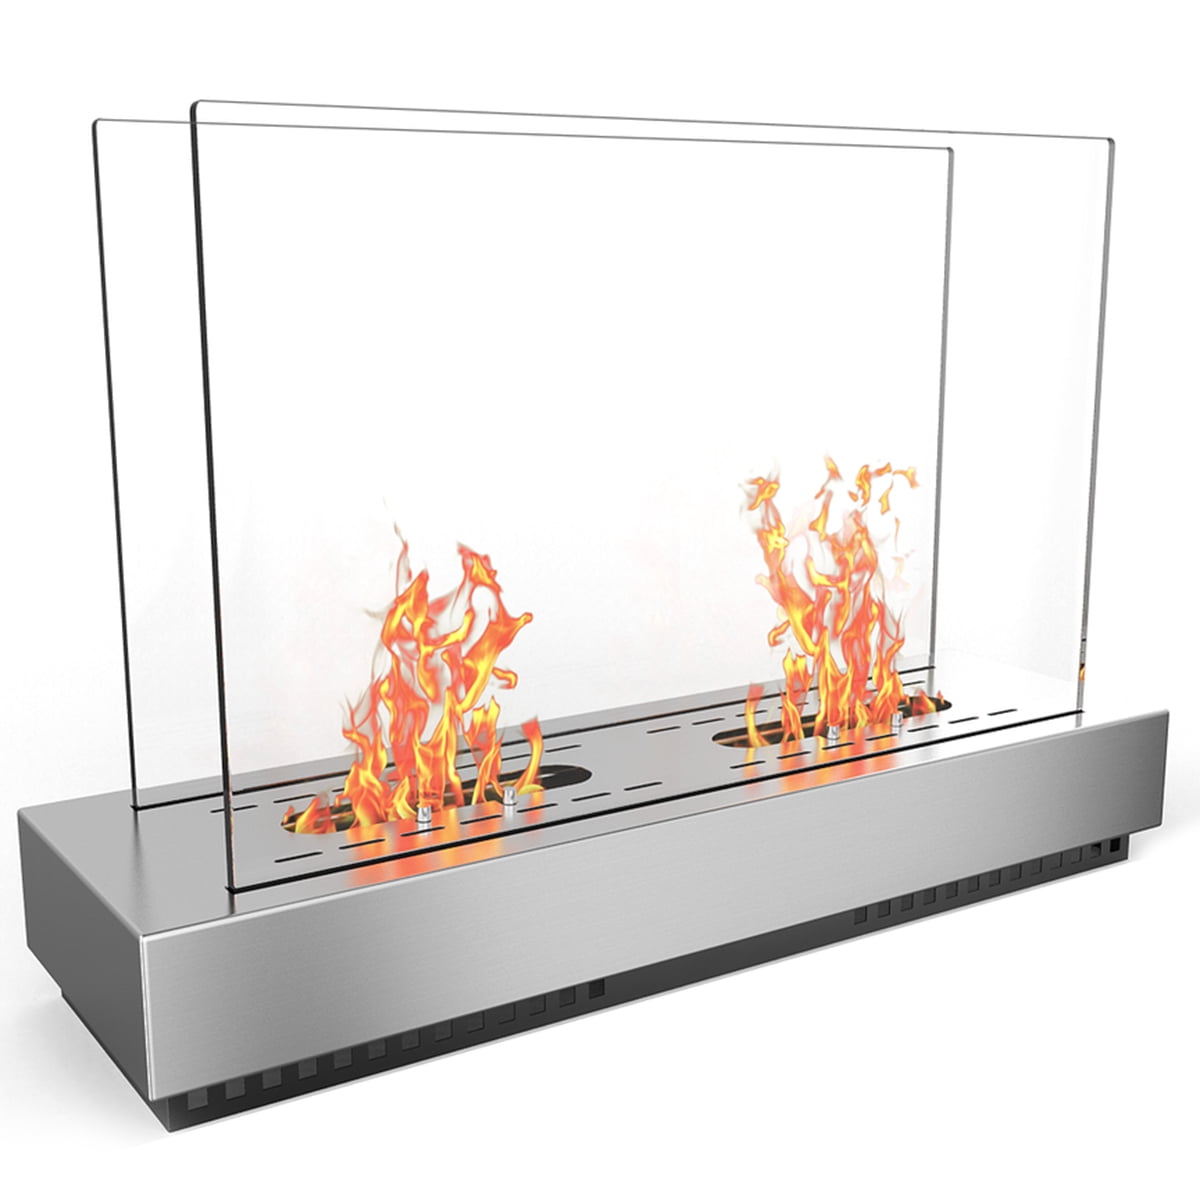 Regal Flame Stainless Steel Phoenix Ventless Free Standing Ethanol Fireplace Can Be Used as a Indoor, Outdoor, Gas Log Inserts